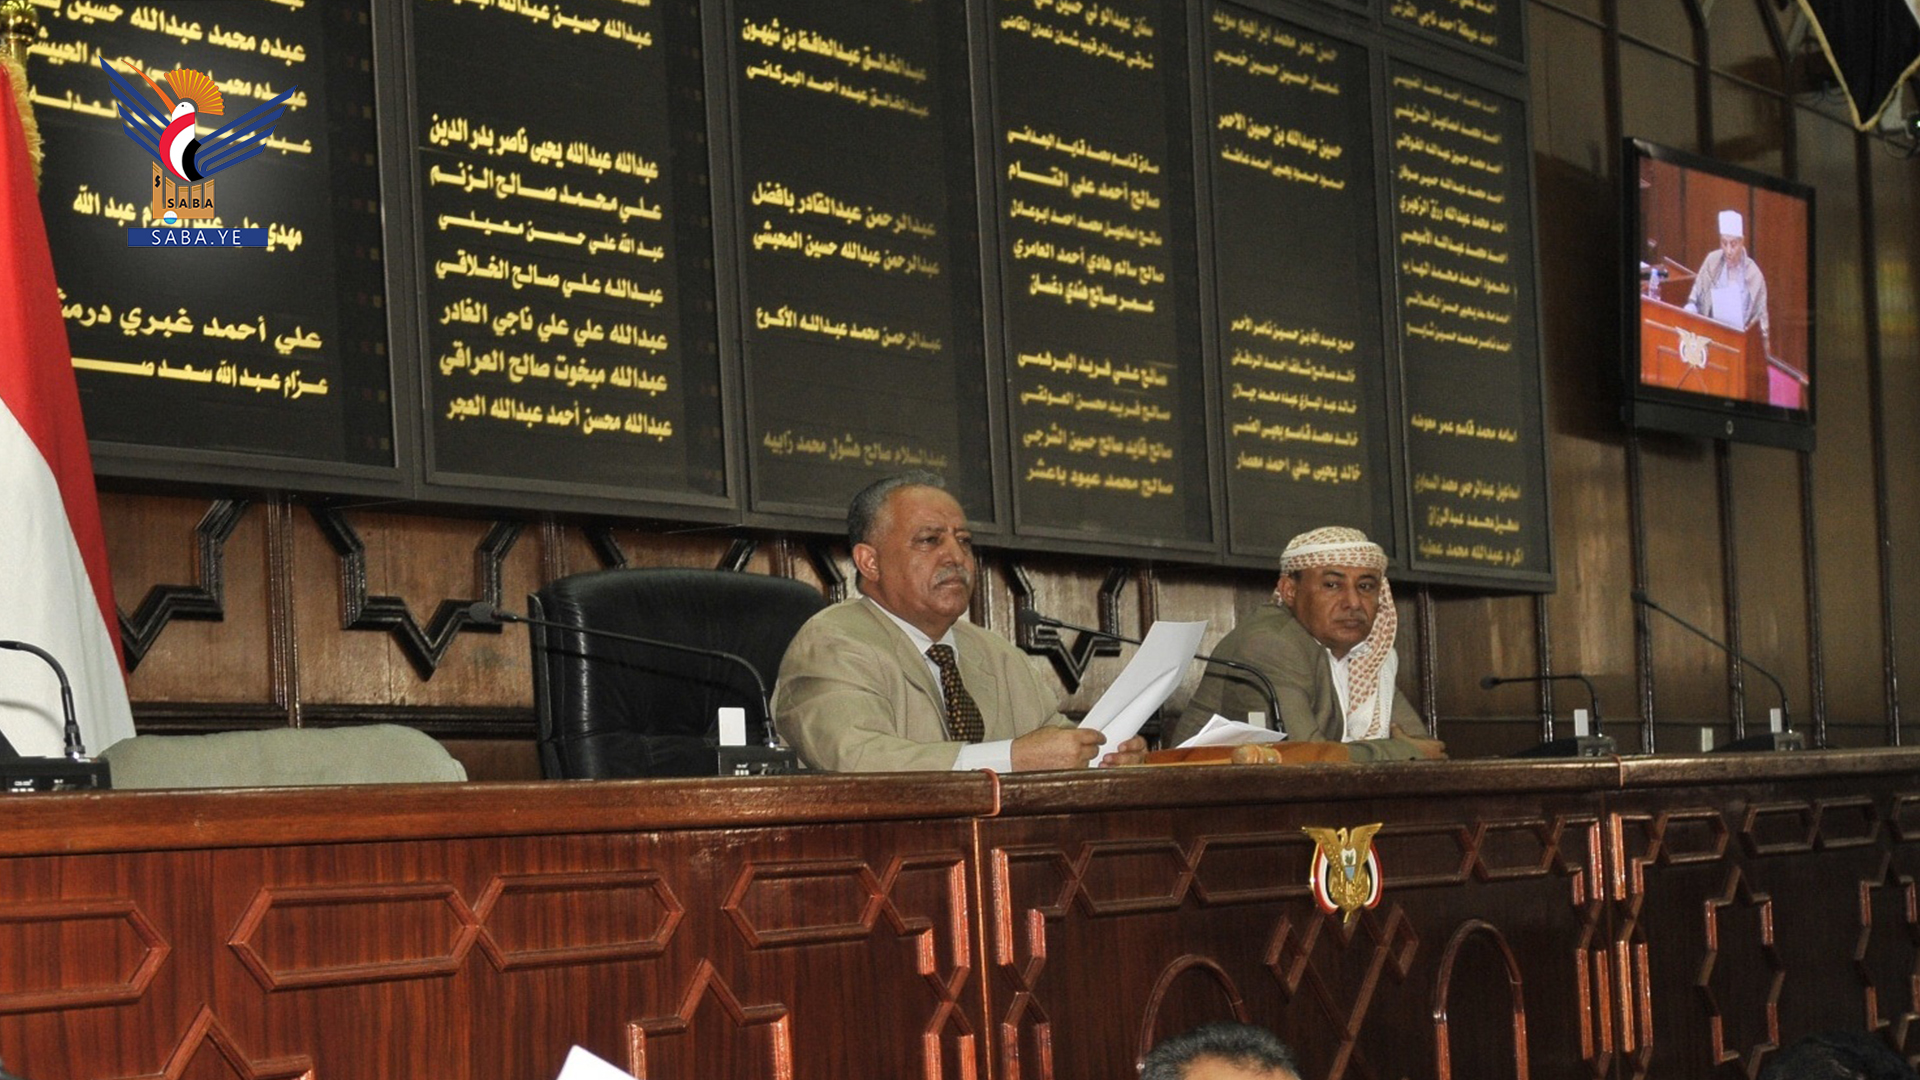 Parliament congratulates revolution leader on 8th anniversary of September 21 revolution, adjourns its sessions for two weeks